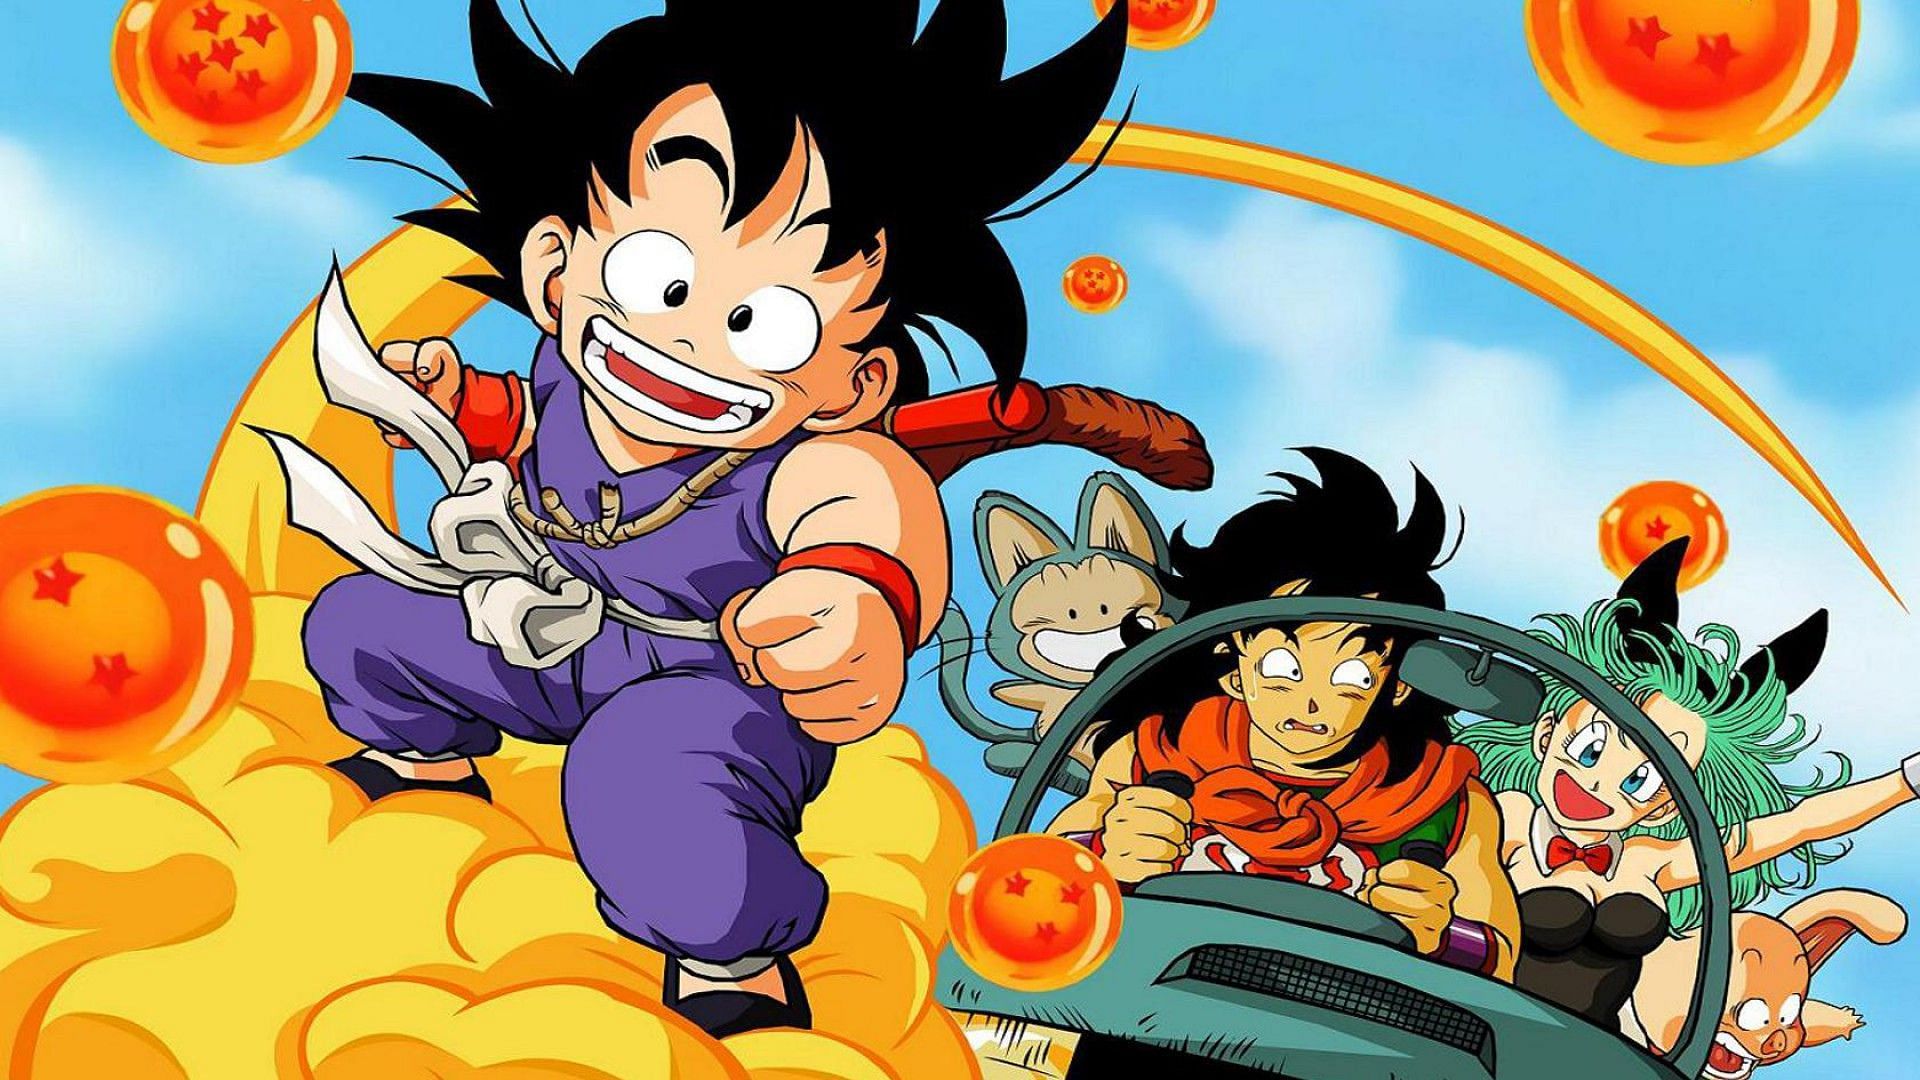 Dragon Ball is one of the worst anime worlds to live in as a normal human, and it